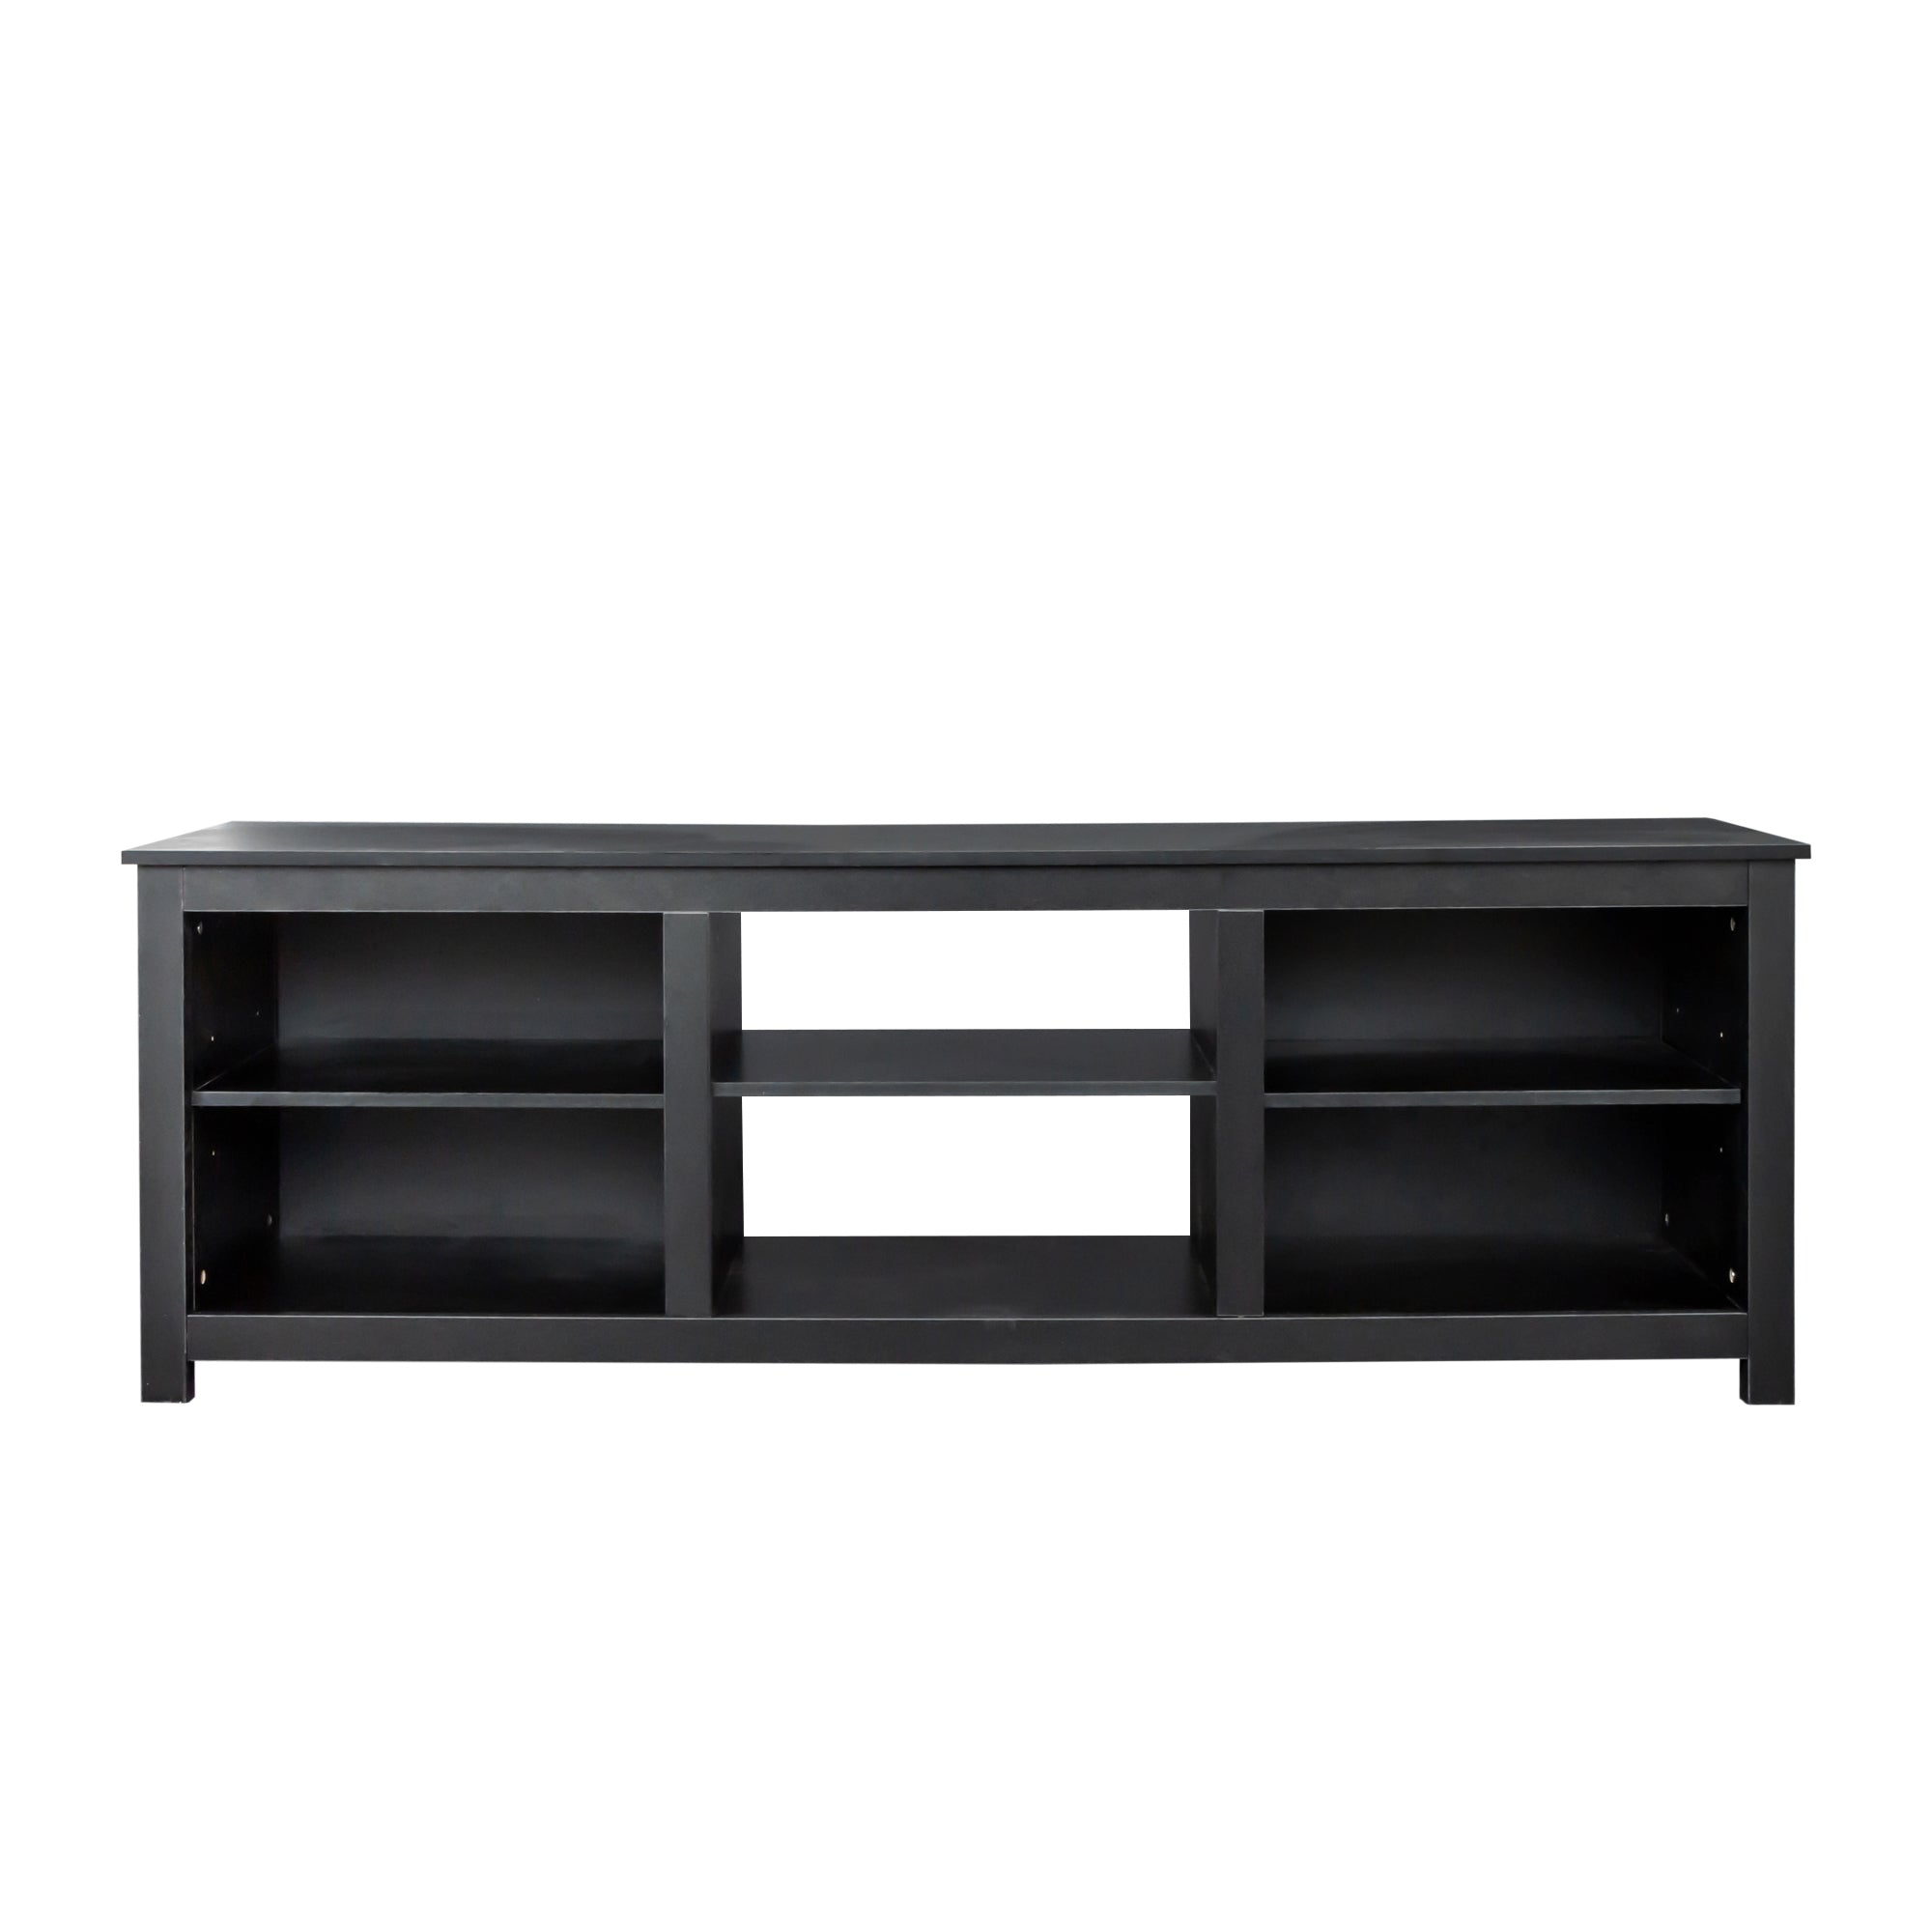 TV Stand with 6 Storage Compartments & 1 Shelf Cabinet, Black